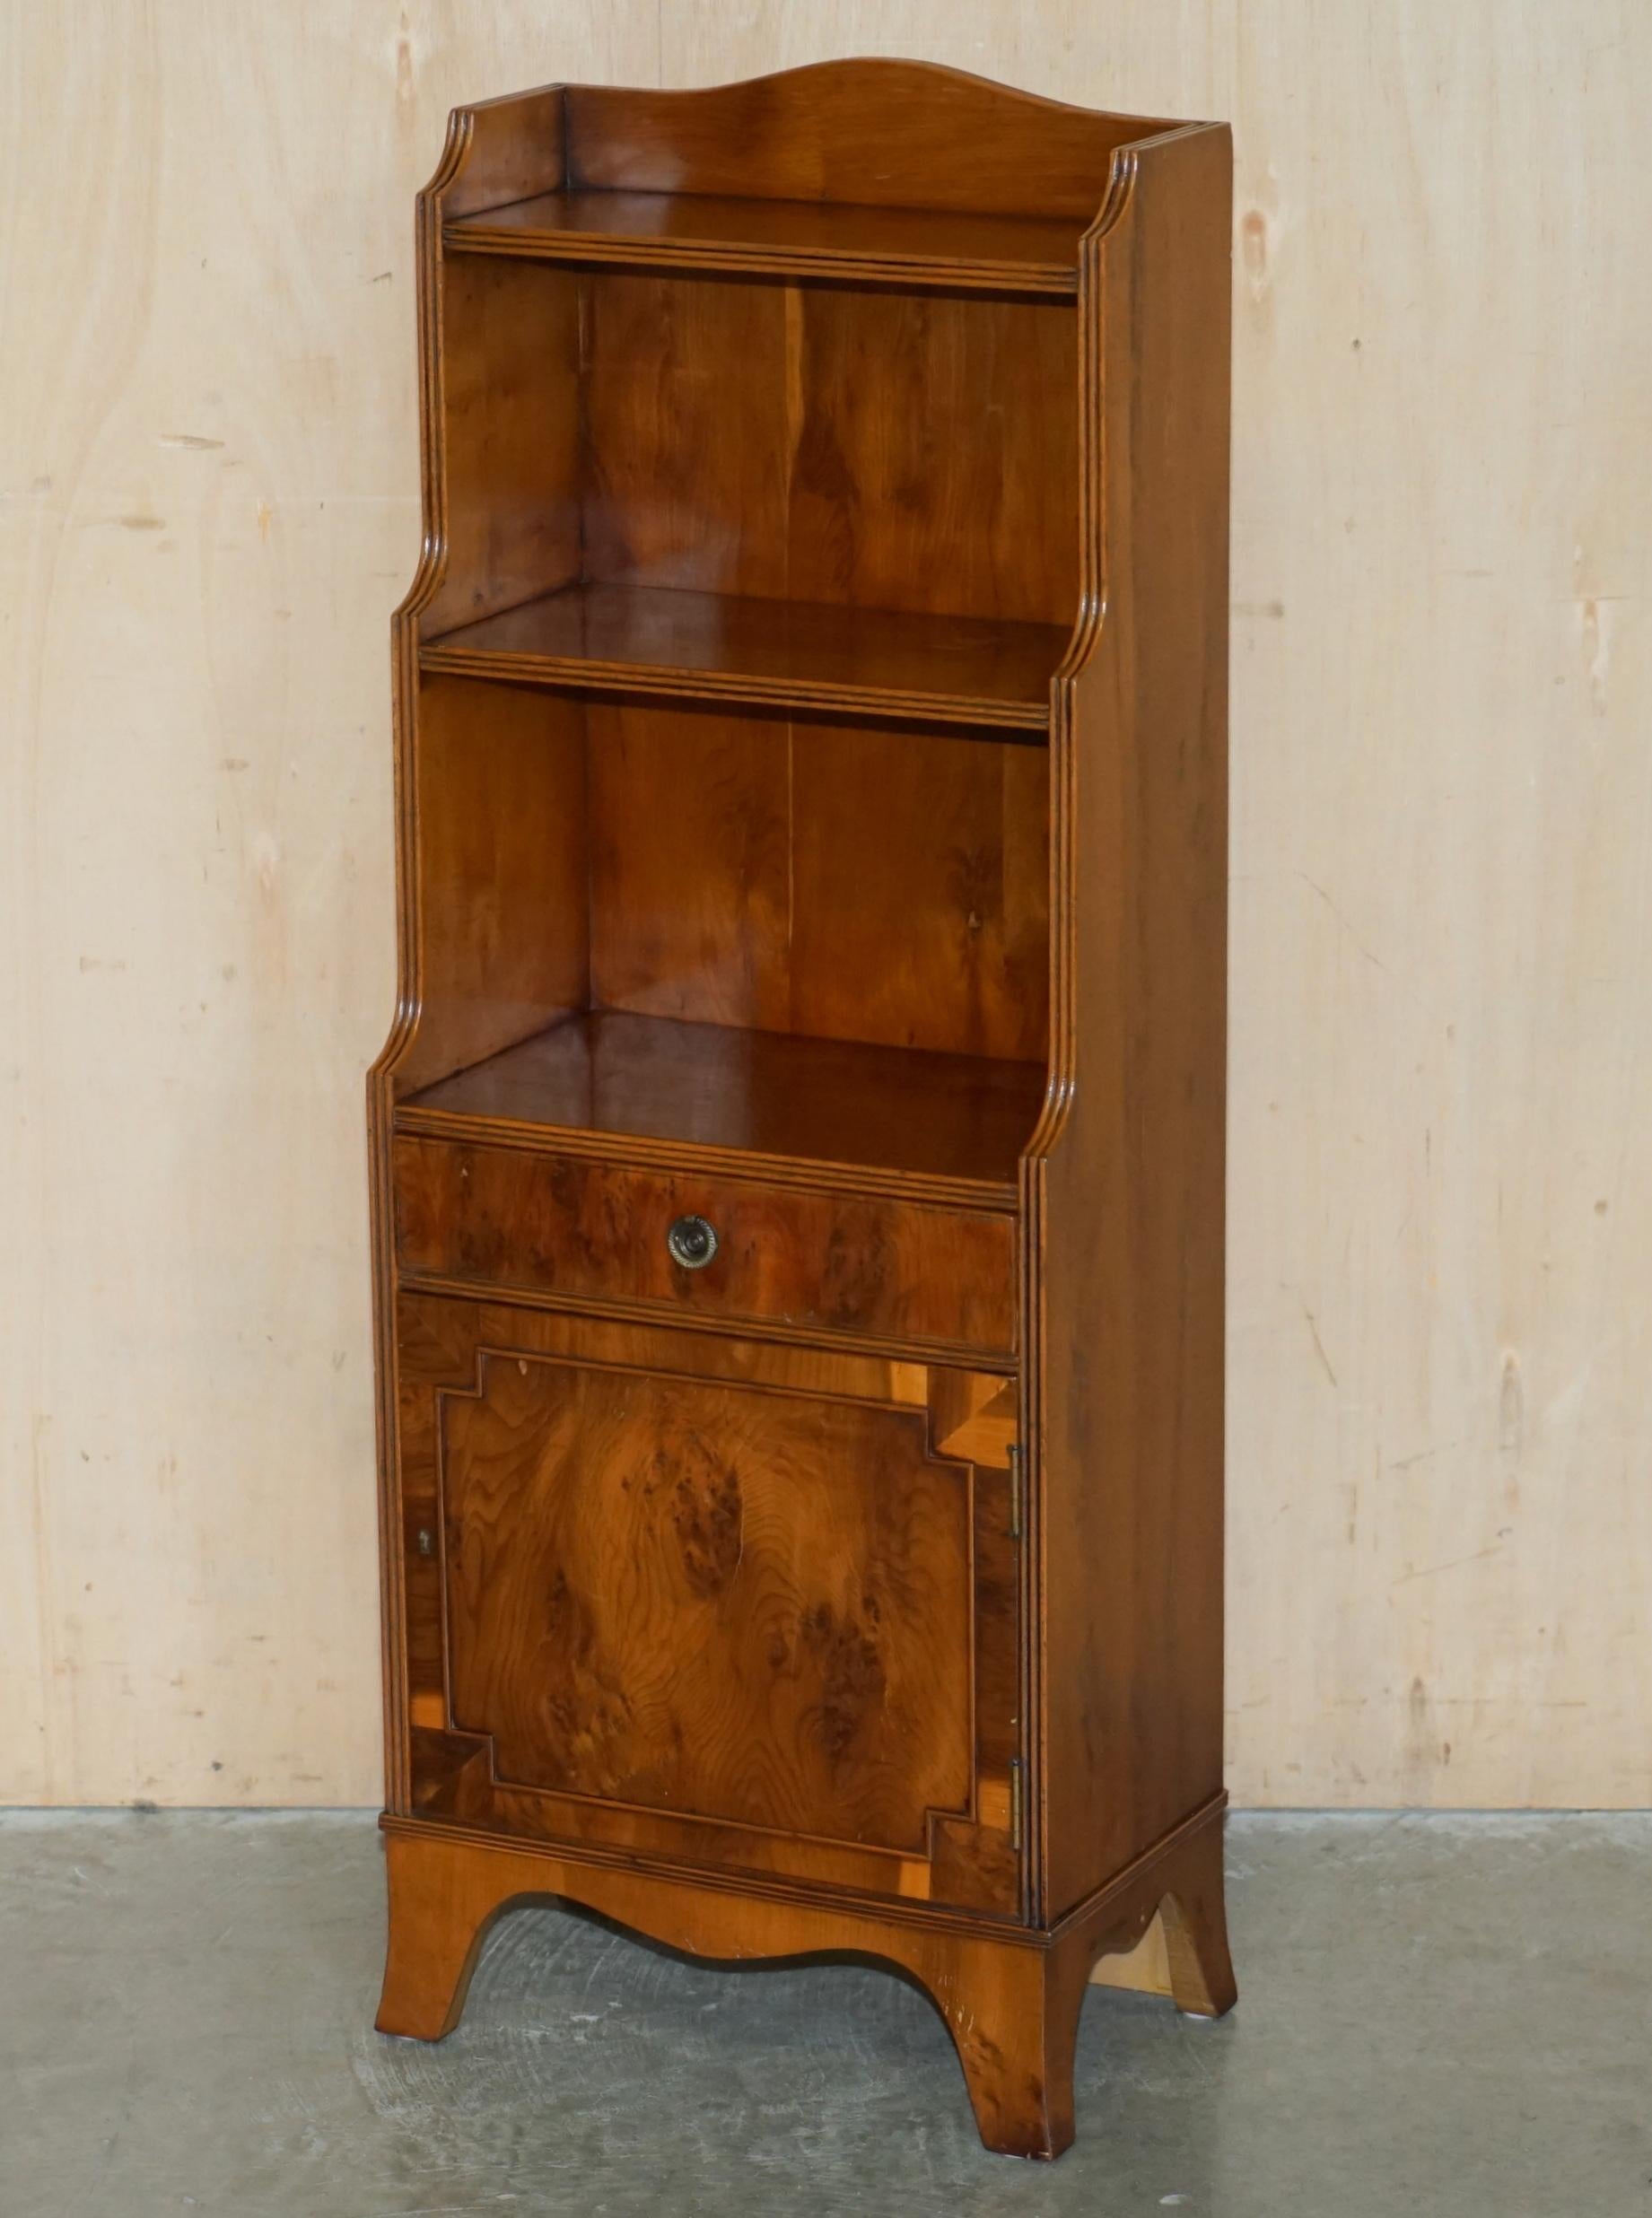 PAIR OF ViNTAGE ENGLISH FLAMED HARDWOOD WATERFALL BOOKCASES WITH CUPBOARD BASES For Sale 10